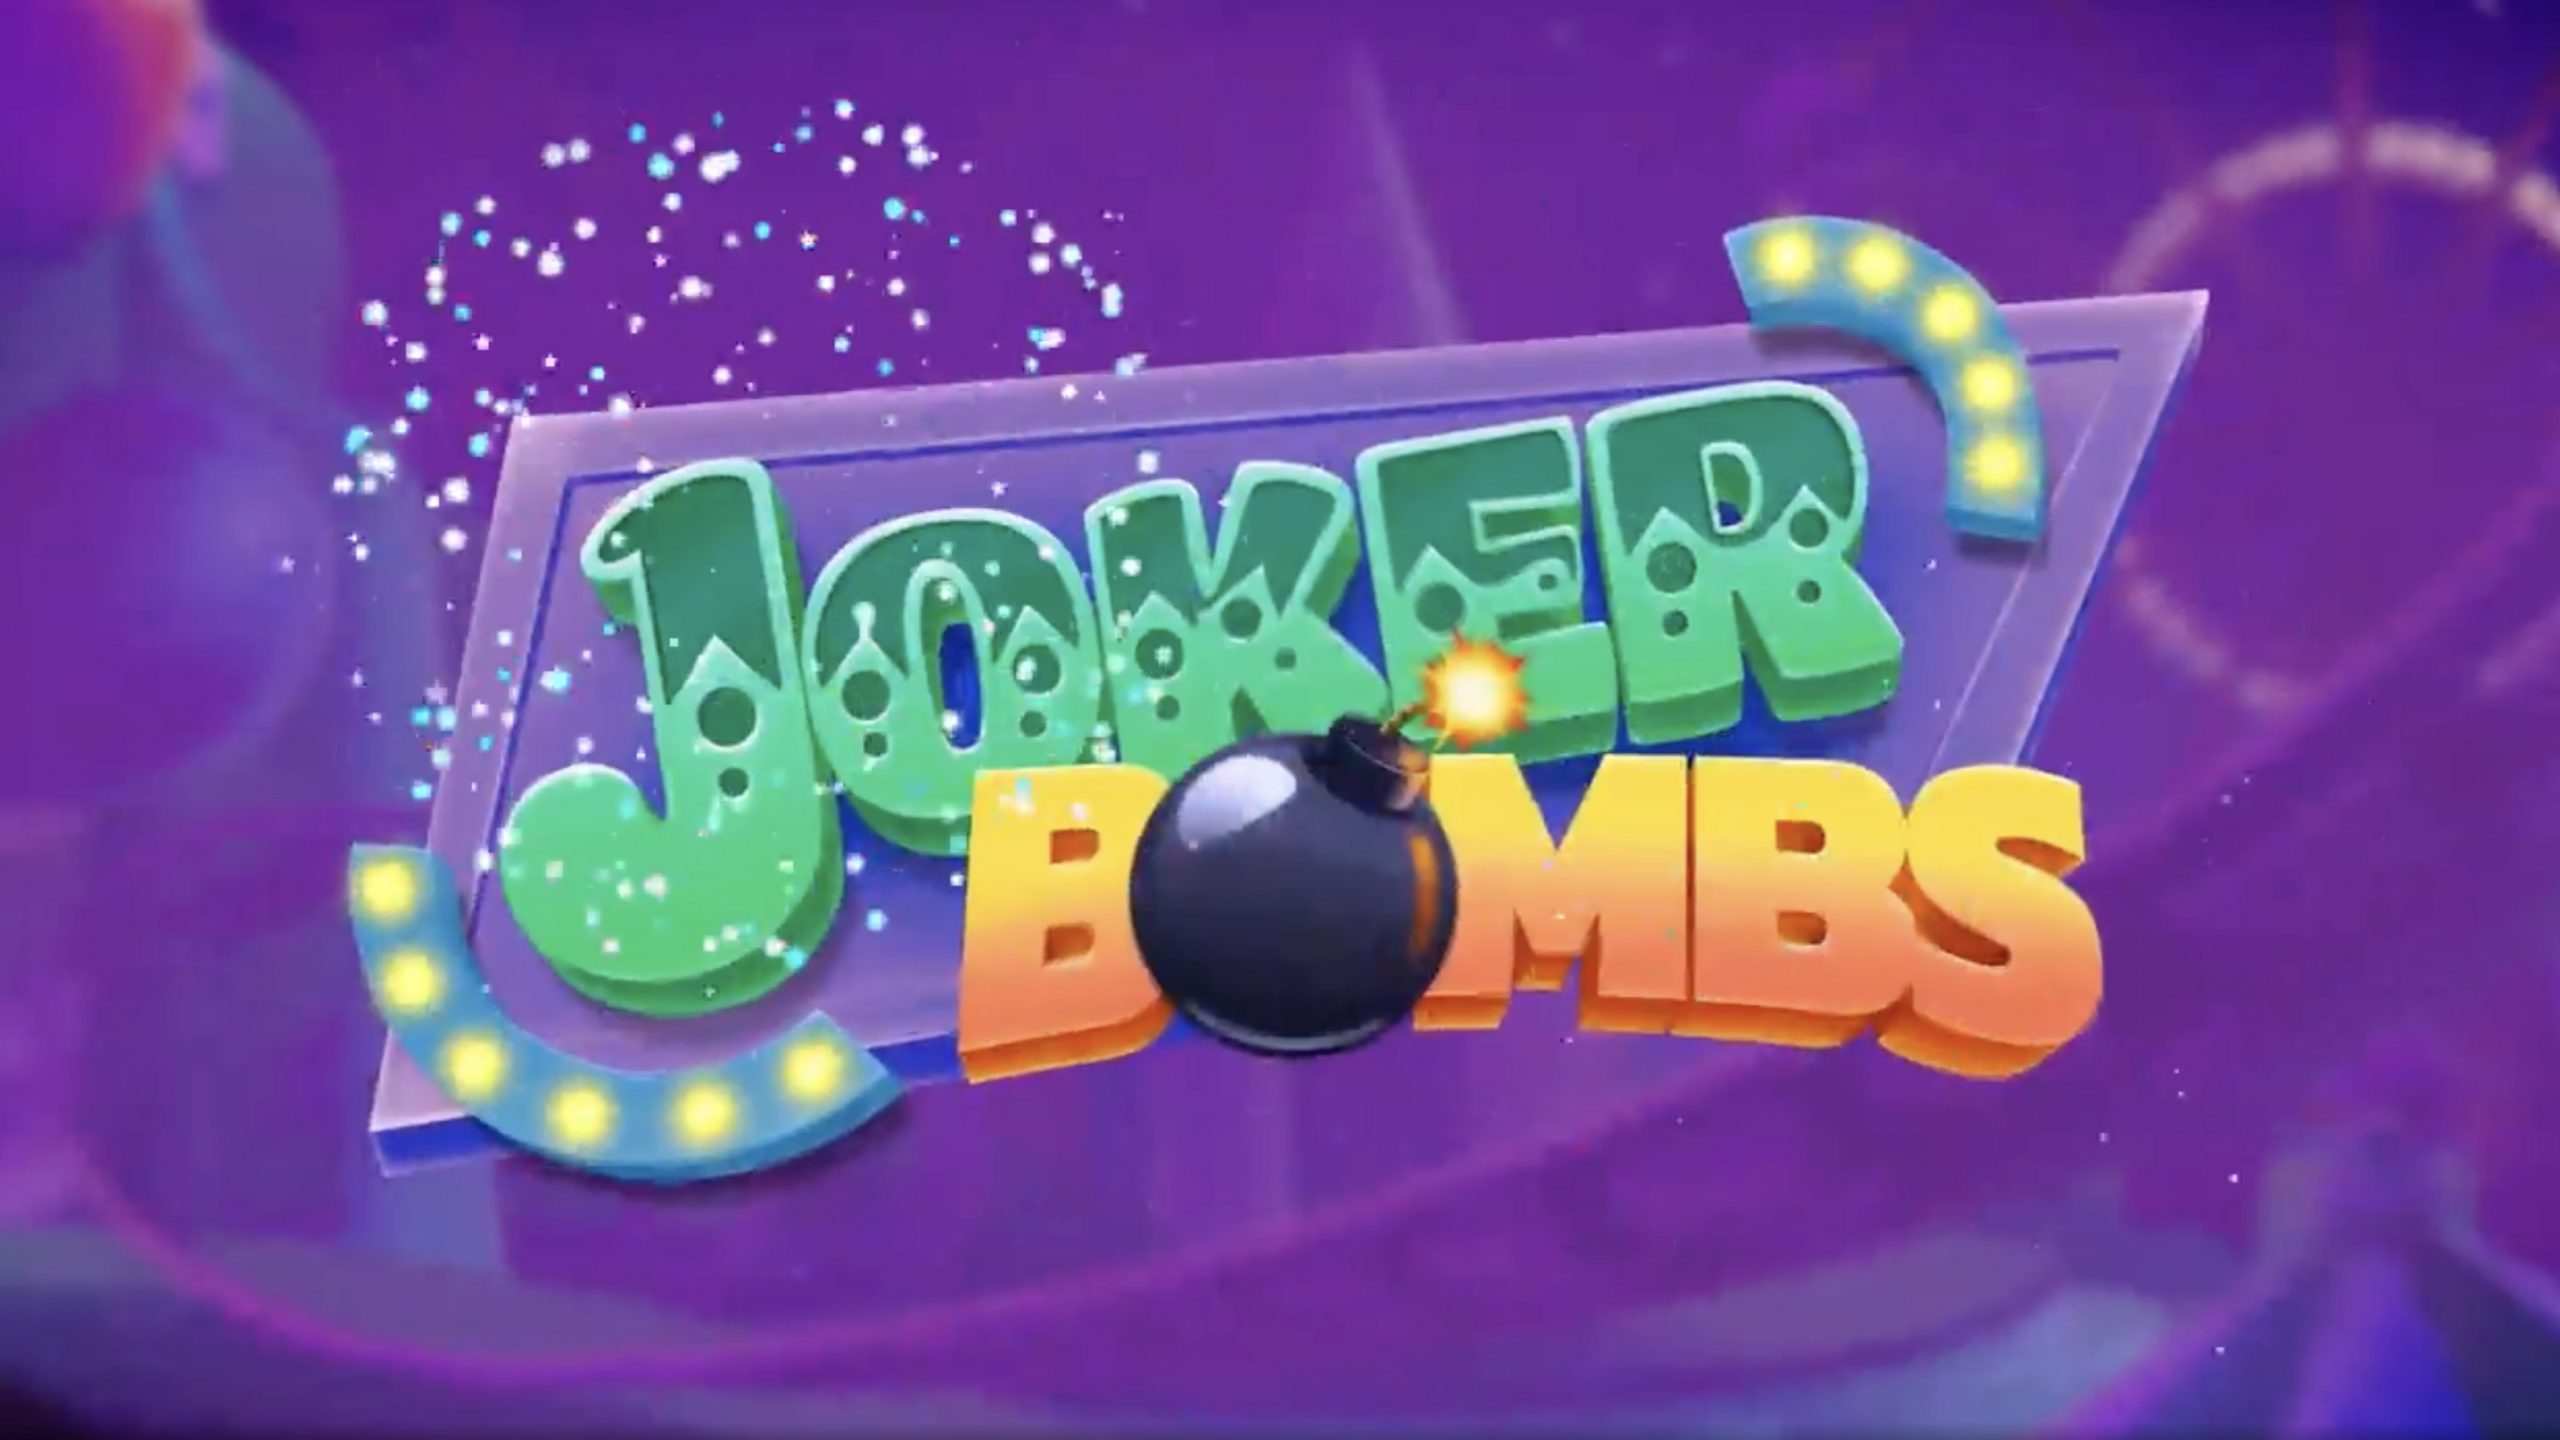 Joker Bombs is a 6x5, scatter-wins video slot that comes with a maximum win potential of up to x5,000 the bet.